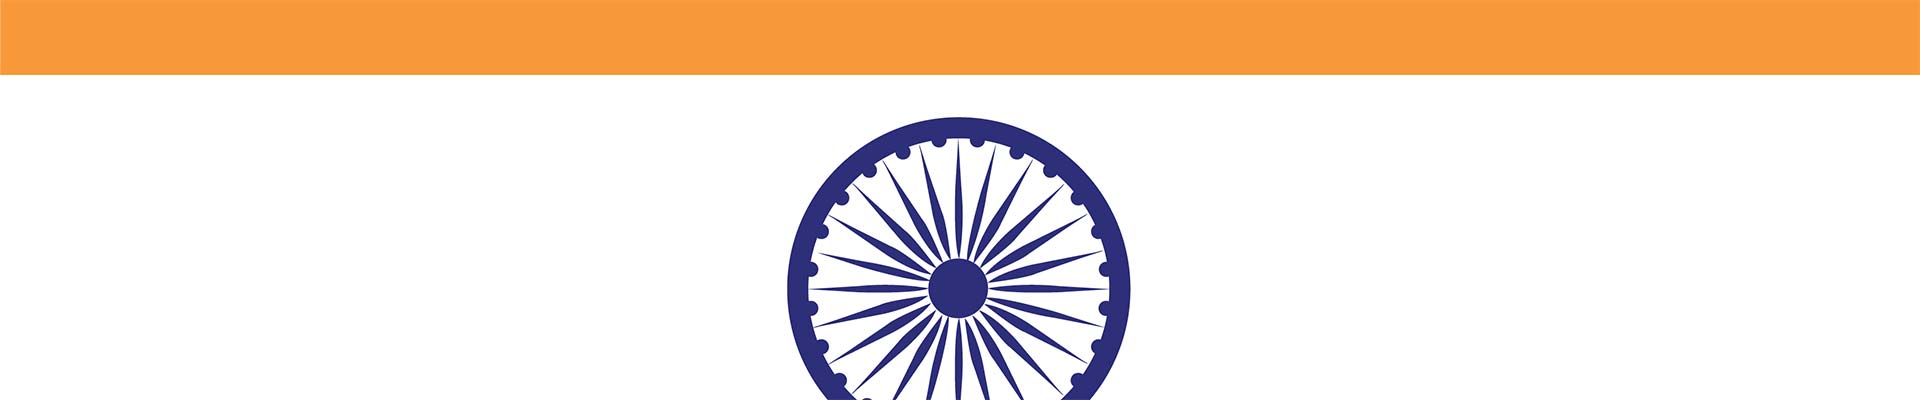 A segment of the Indian flag